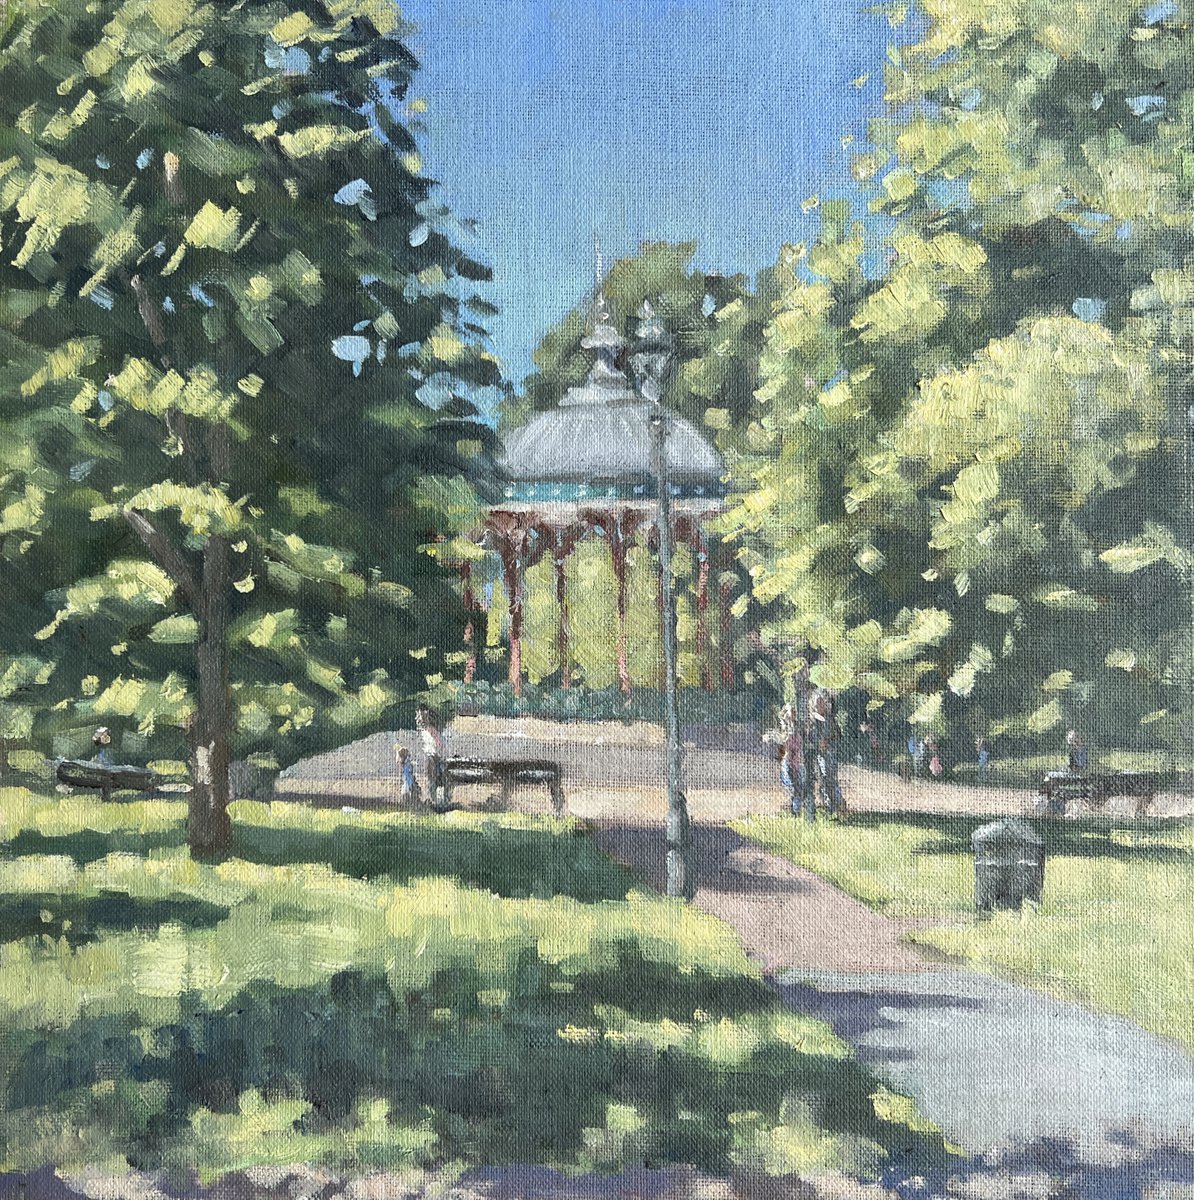 Clapham Common early summer morning by Louise Gillard